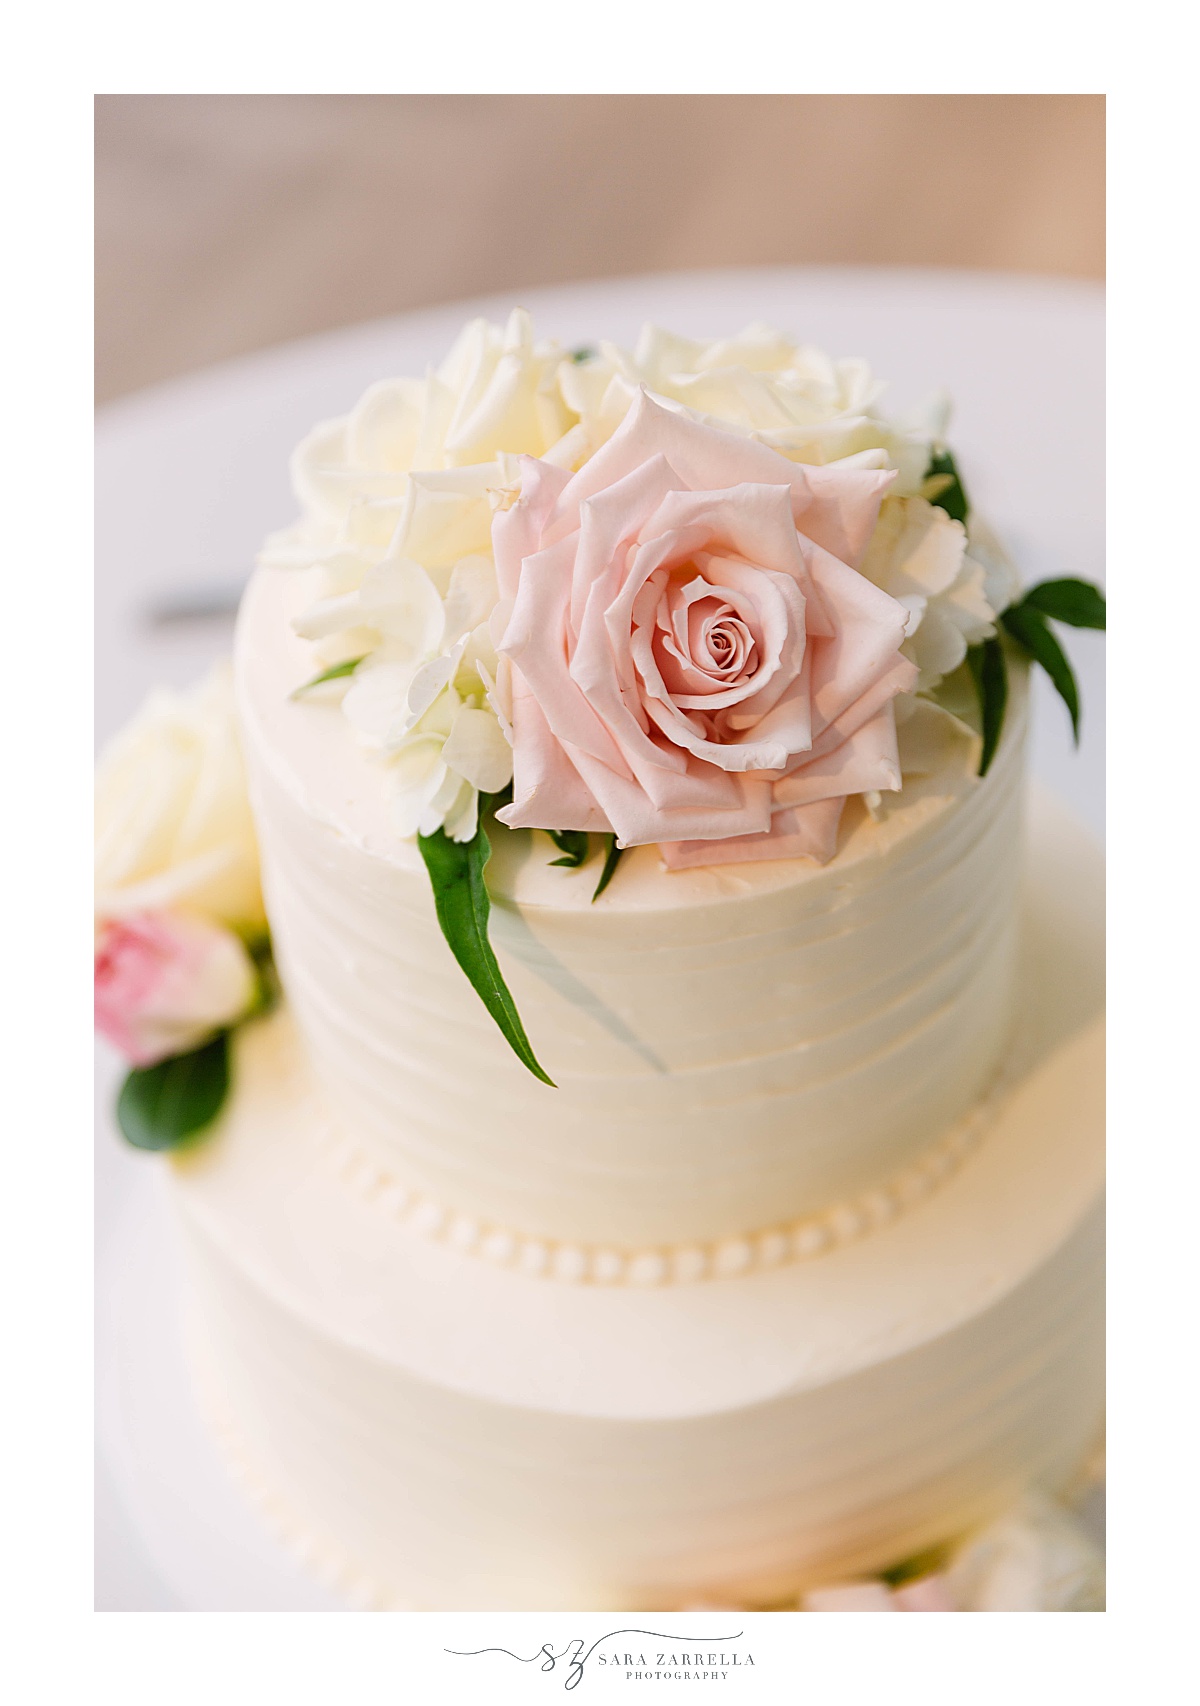 wedding cake with florals on top